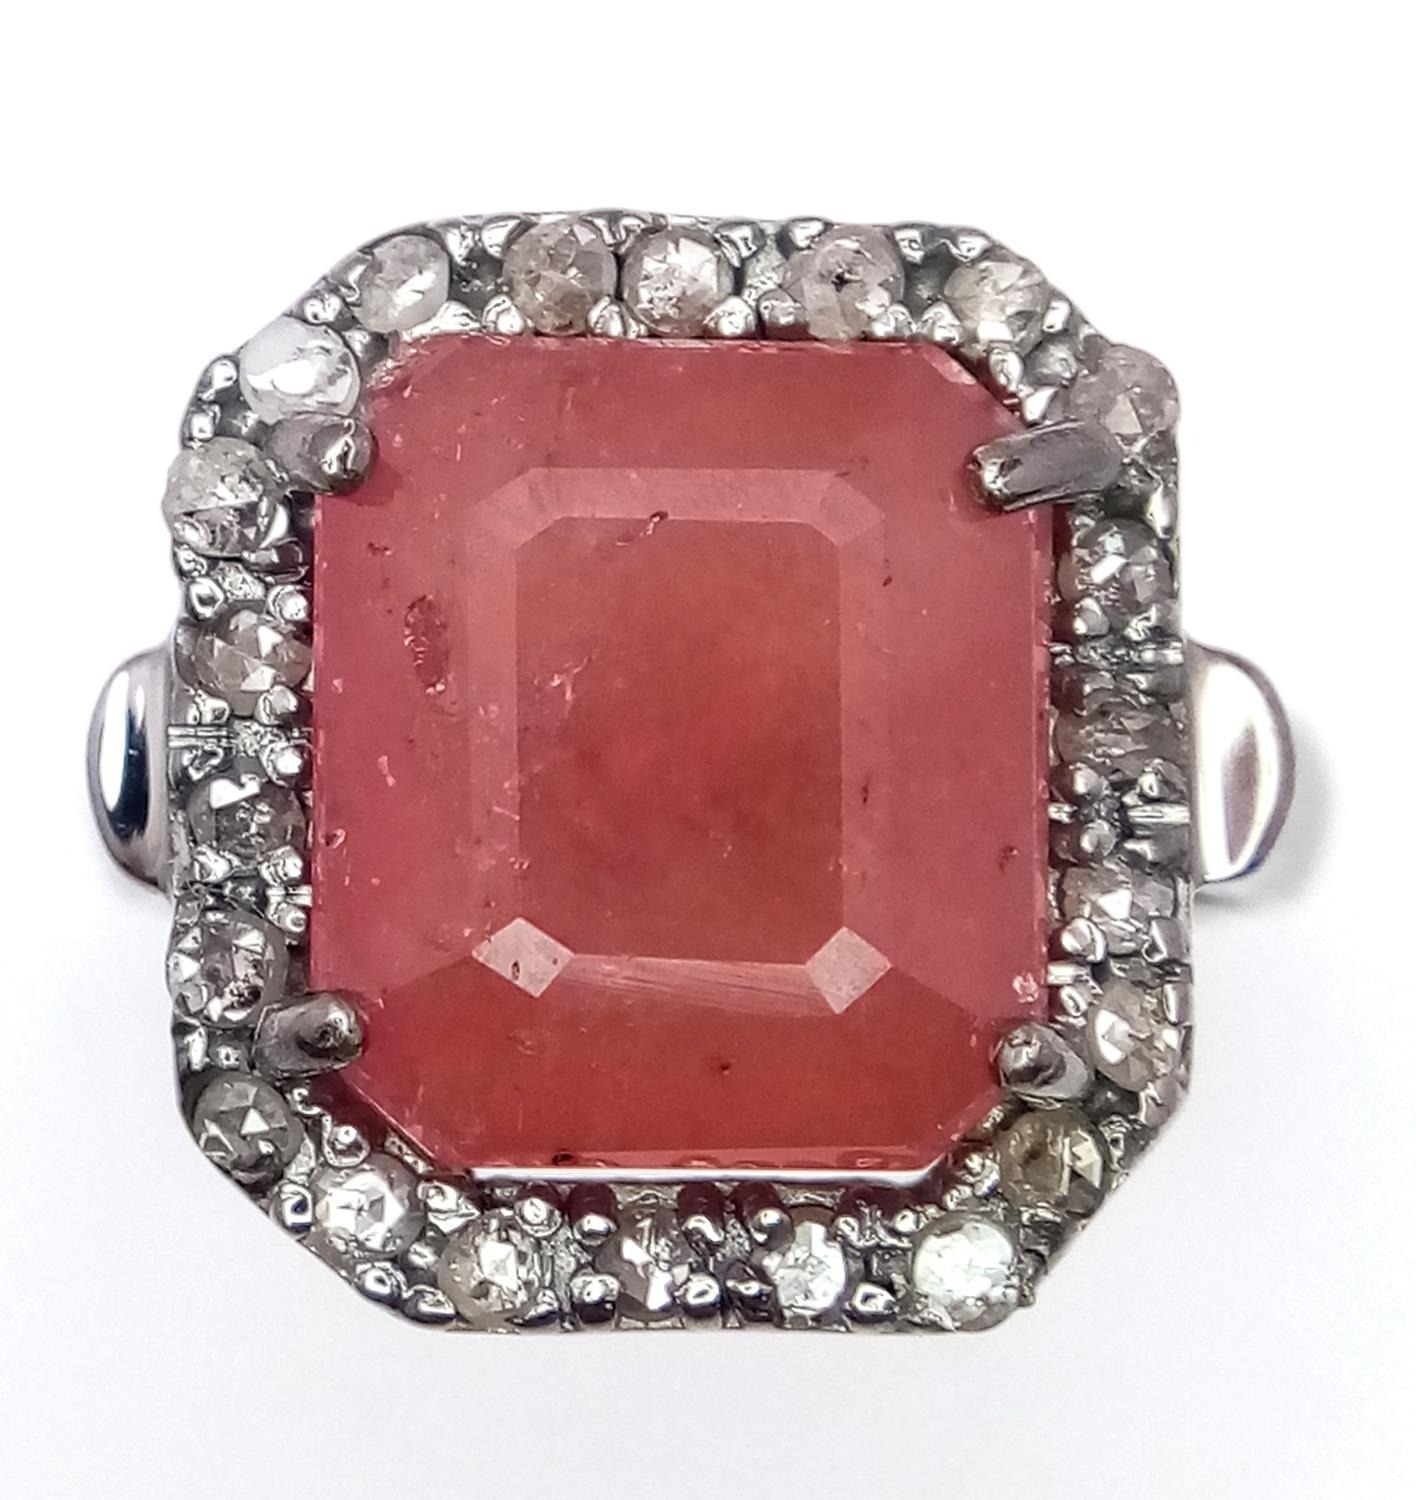 A Ruby Gemstone Ring with a Diamond Surround. 5.5ct ruby and diamonds - 0.55ctw. Set in 925